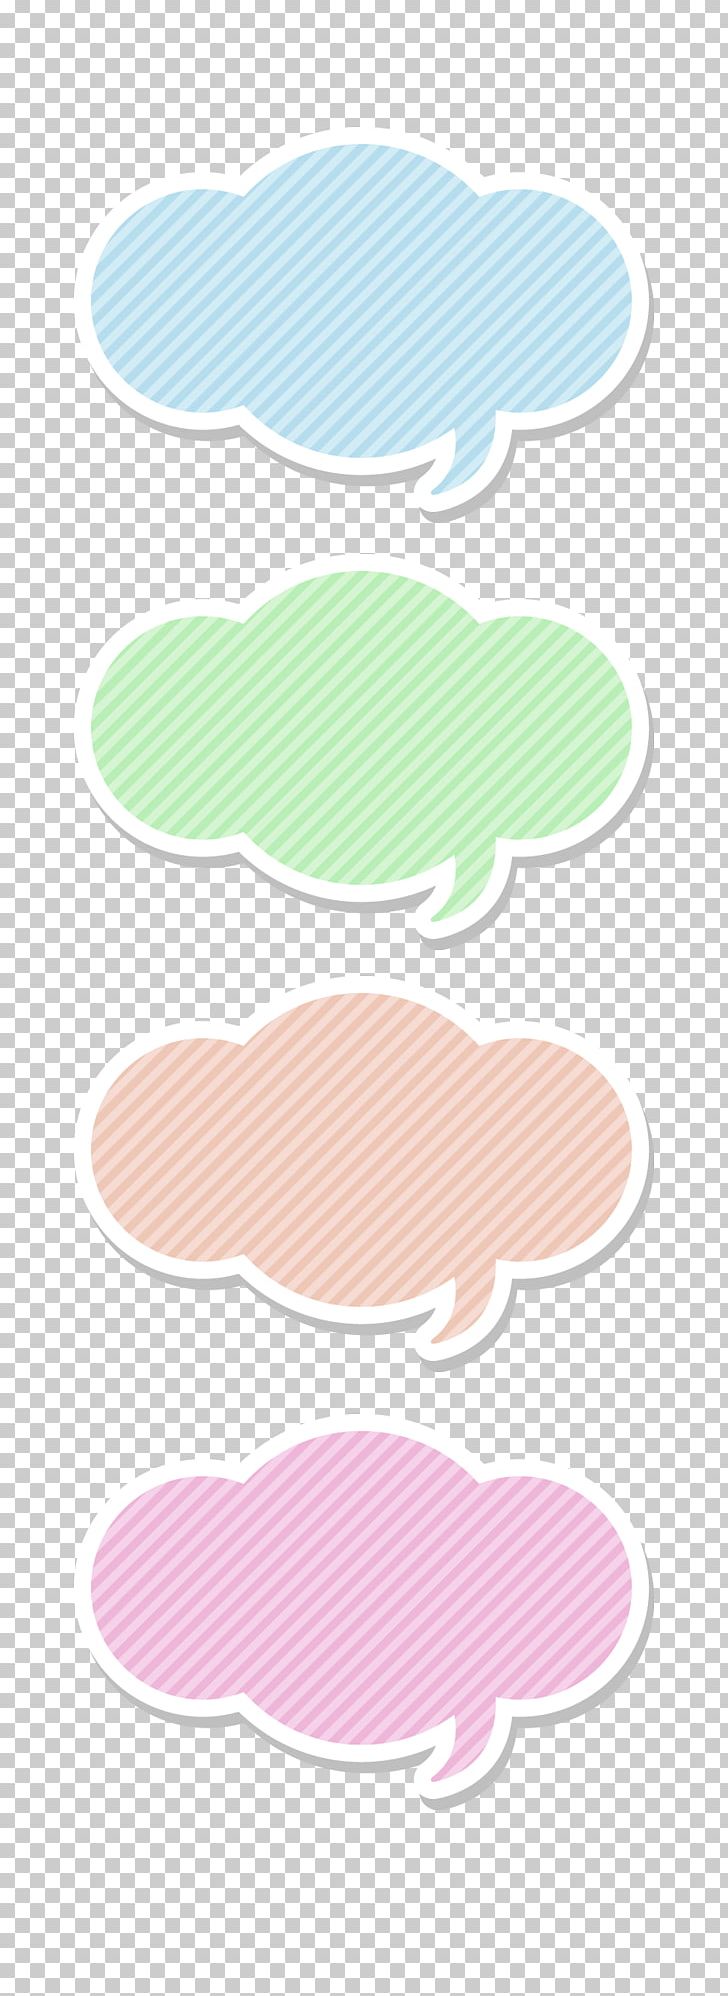 Dialog Box Icon PNG, Clipart, Adobe Illustrator, Blue Sky And White Clouds, Cartoon Cloud, Cloud, Cloud Computing Free PNG Download